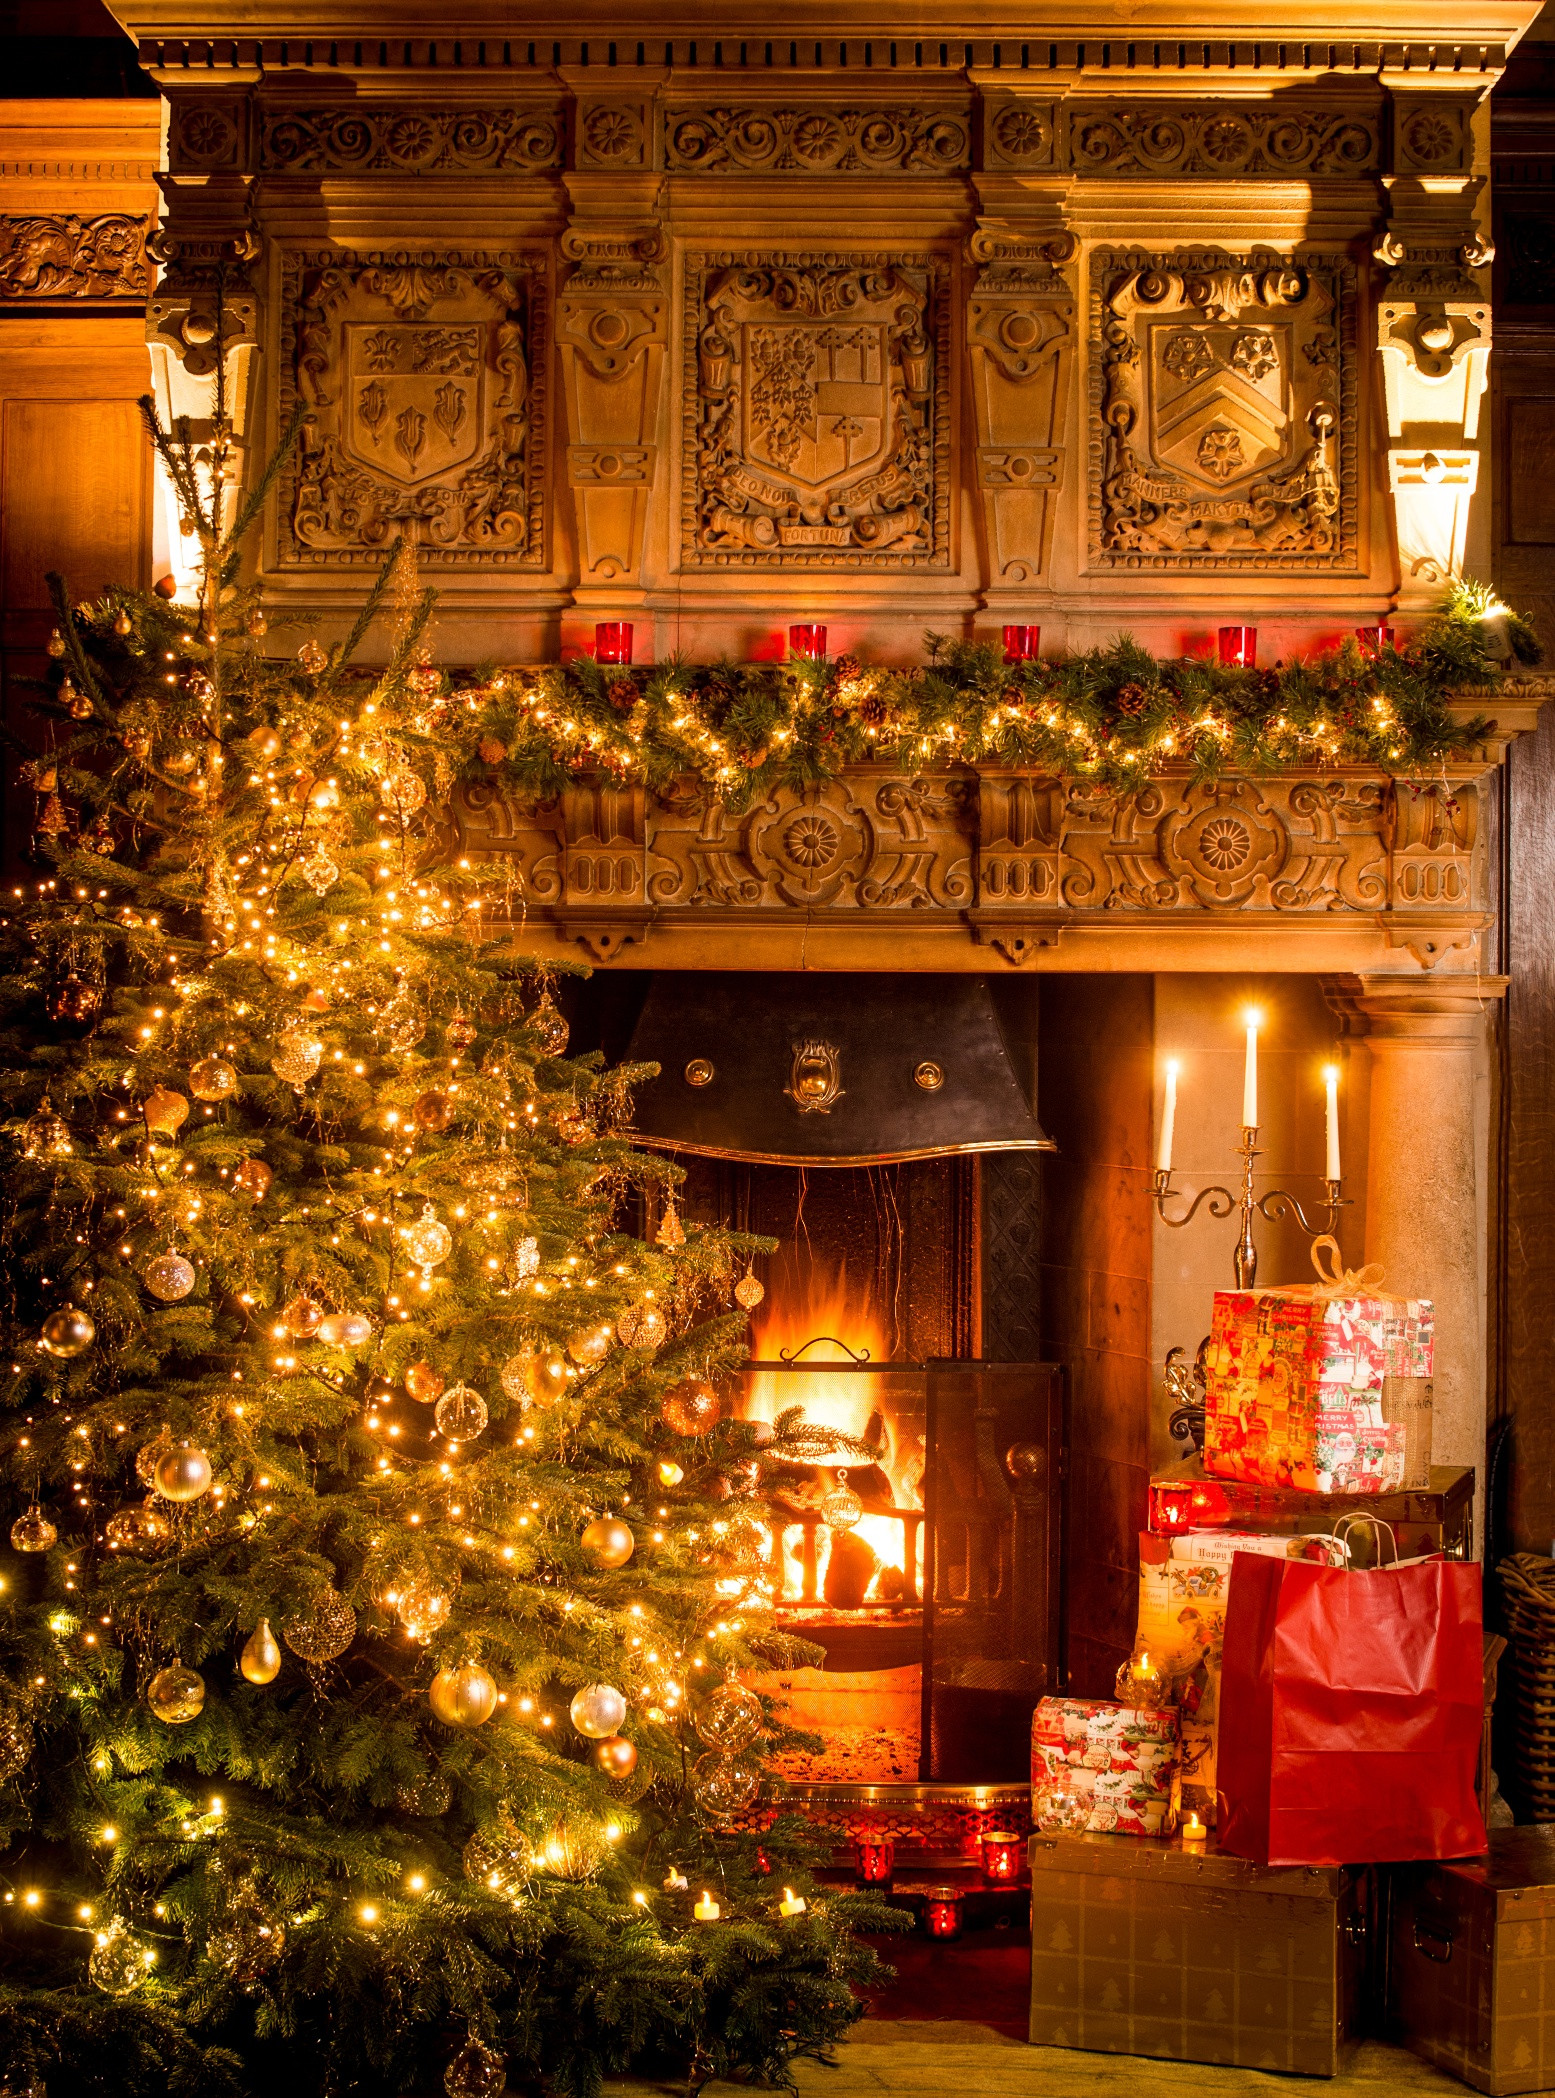 Christmas Wallpaper Fireplace
 4K Christmas Fireplaces Wallpapers High Quality